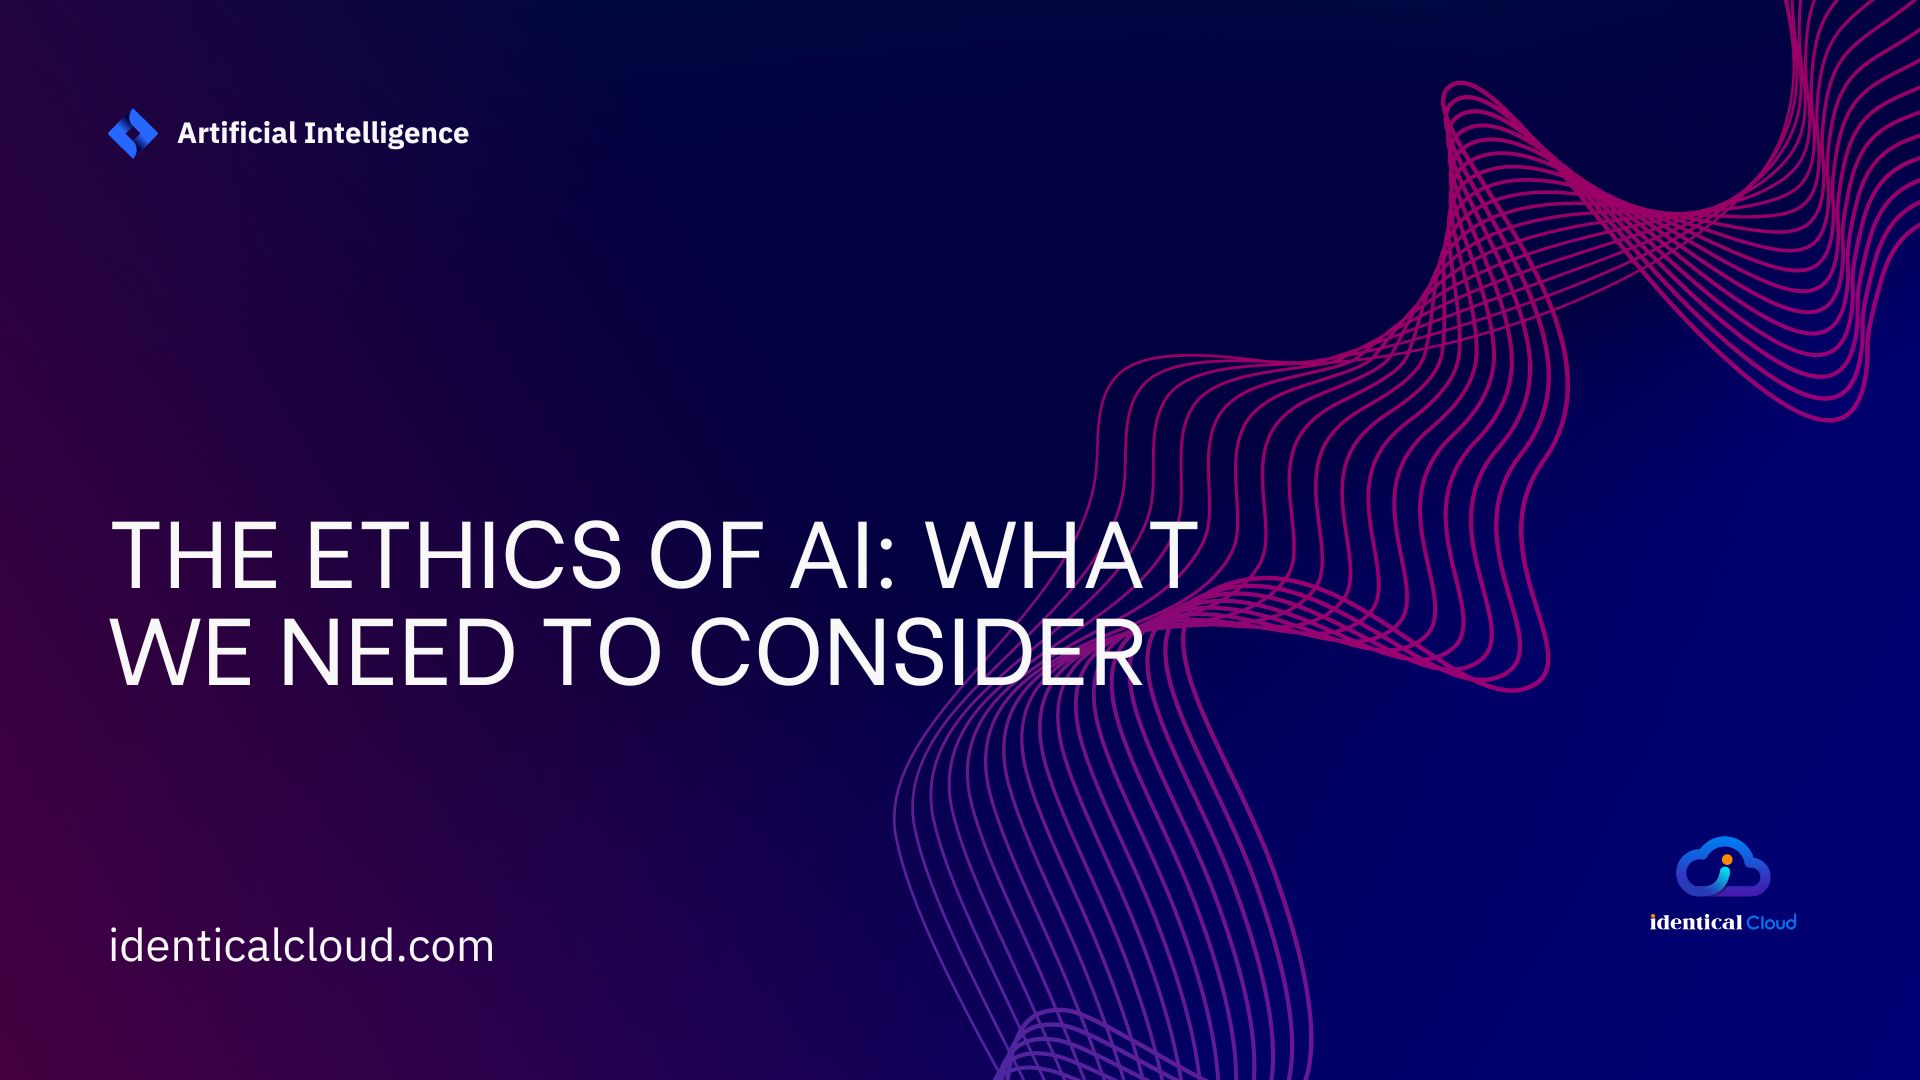 The Ethics of AI: What We Need to Consider - identicalcloud.com